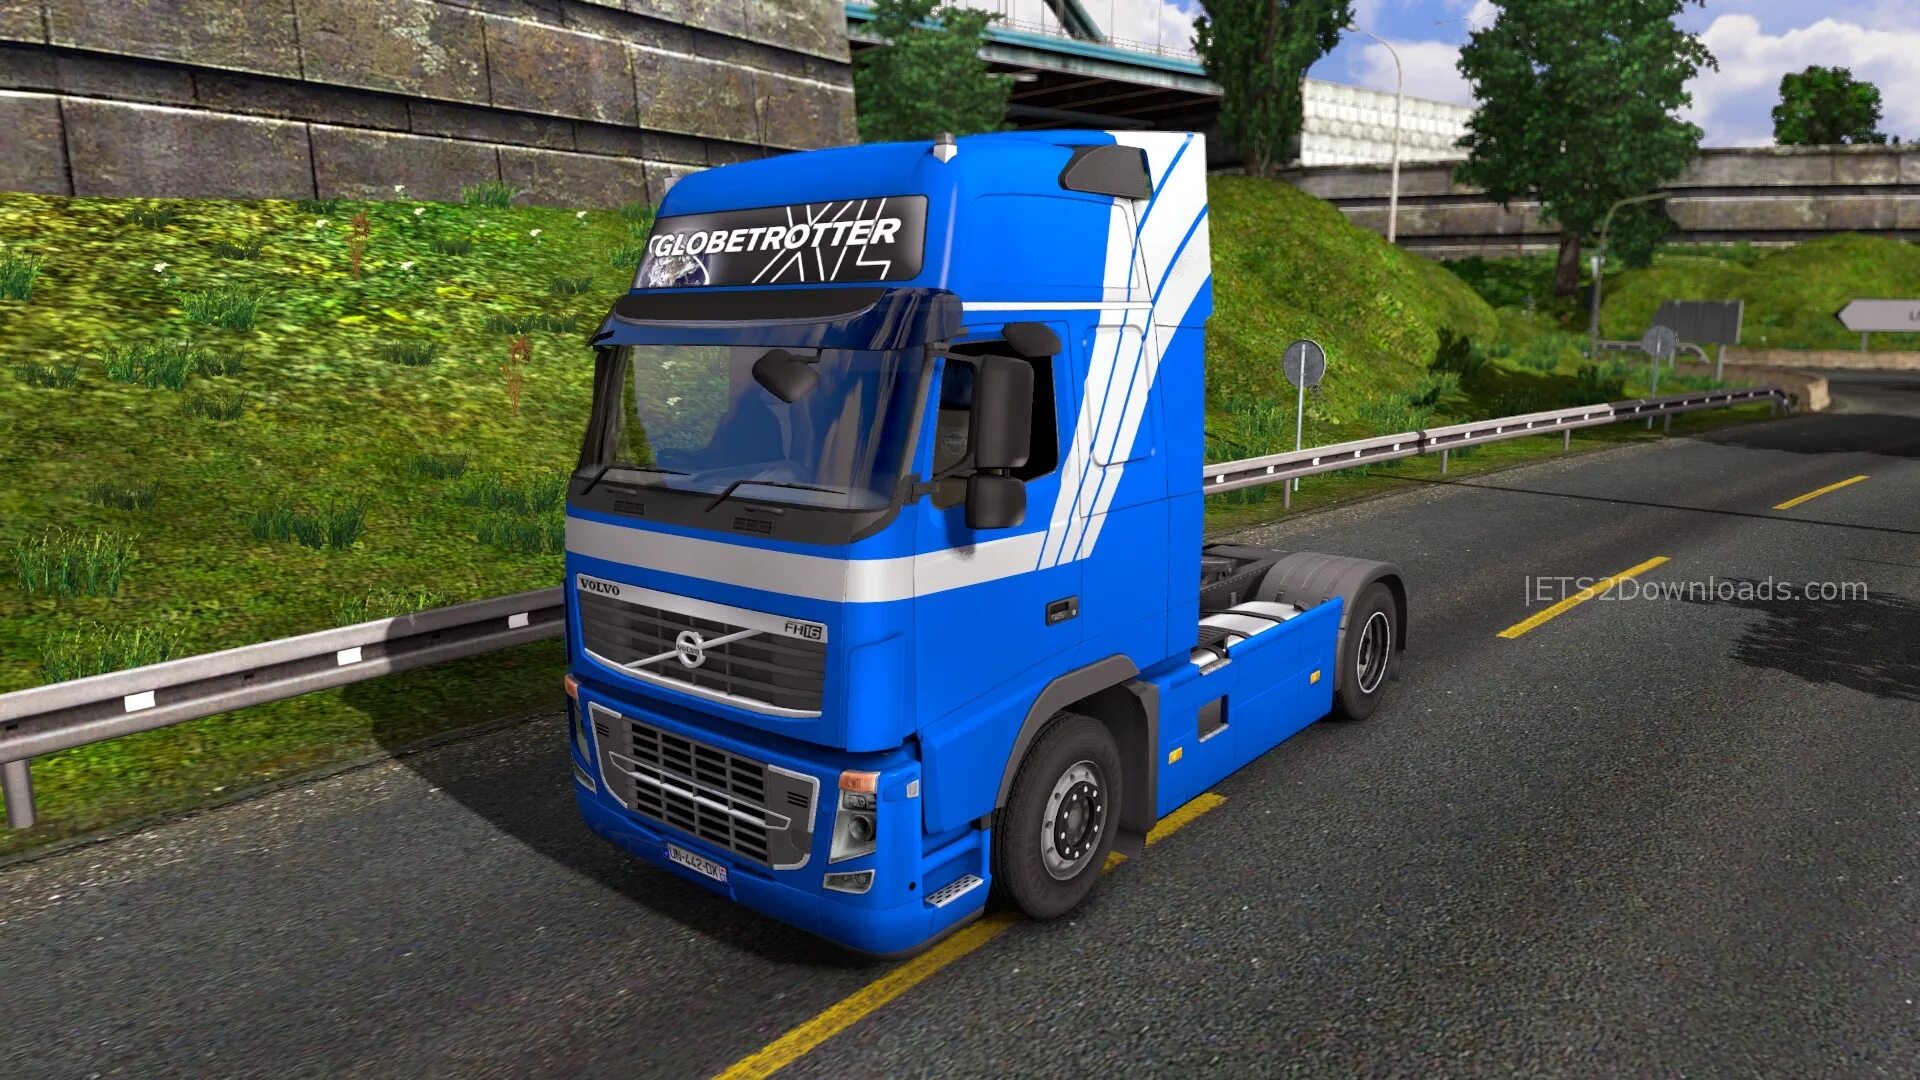 Volvo FH 2009. Volvo FH Globetrotter етс 2. Volvo fh16 2009 ETS 2. Volvo fh16 Classic ETS 2.